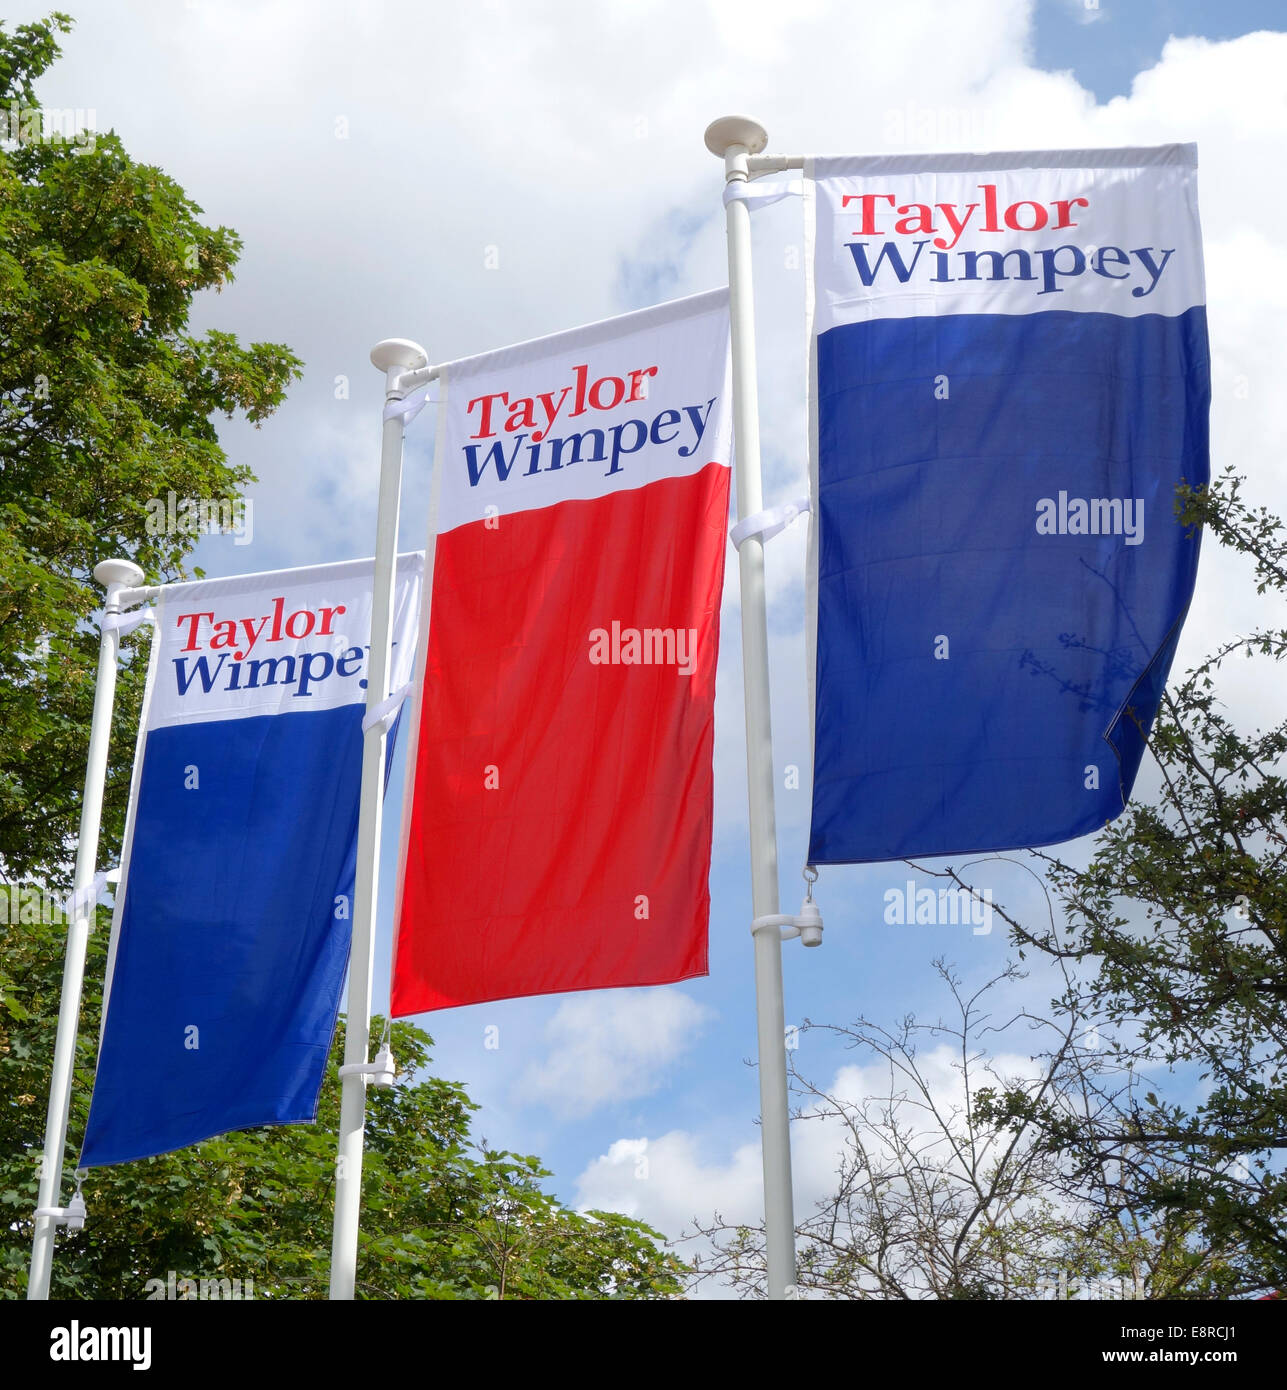 Taylor Wimpey Building Company Flag, UK Stock Photo